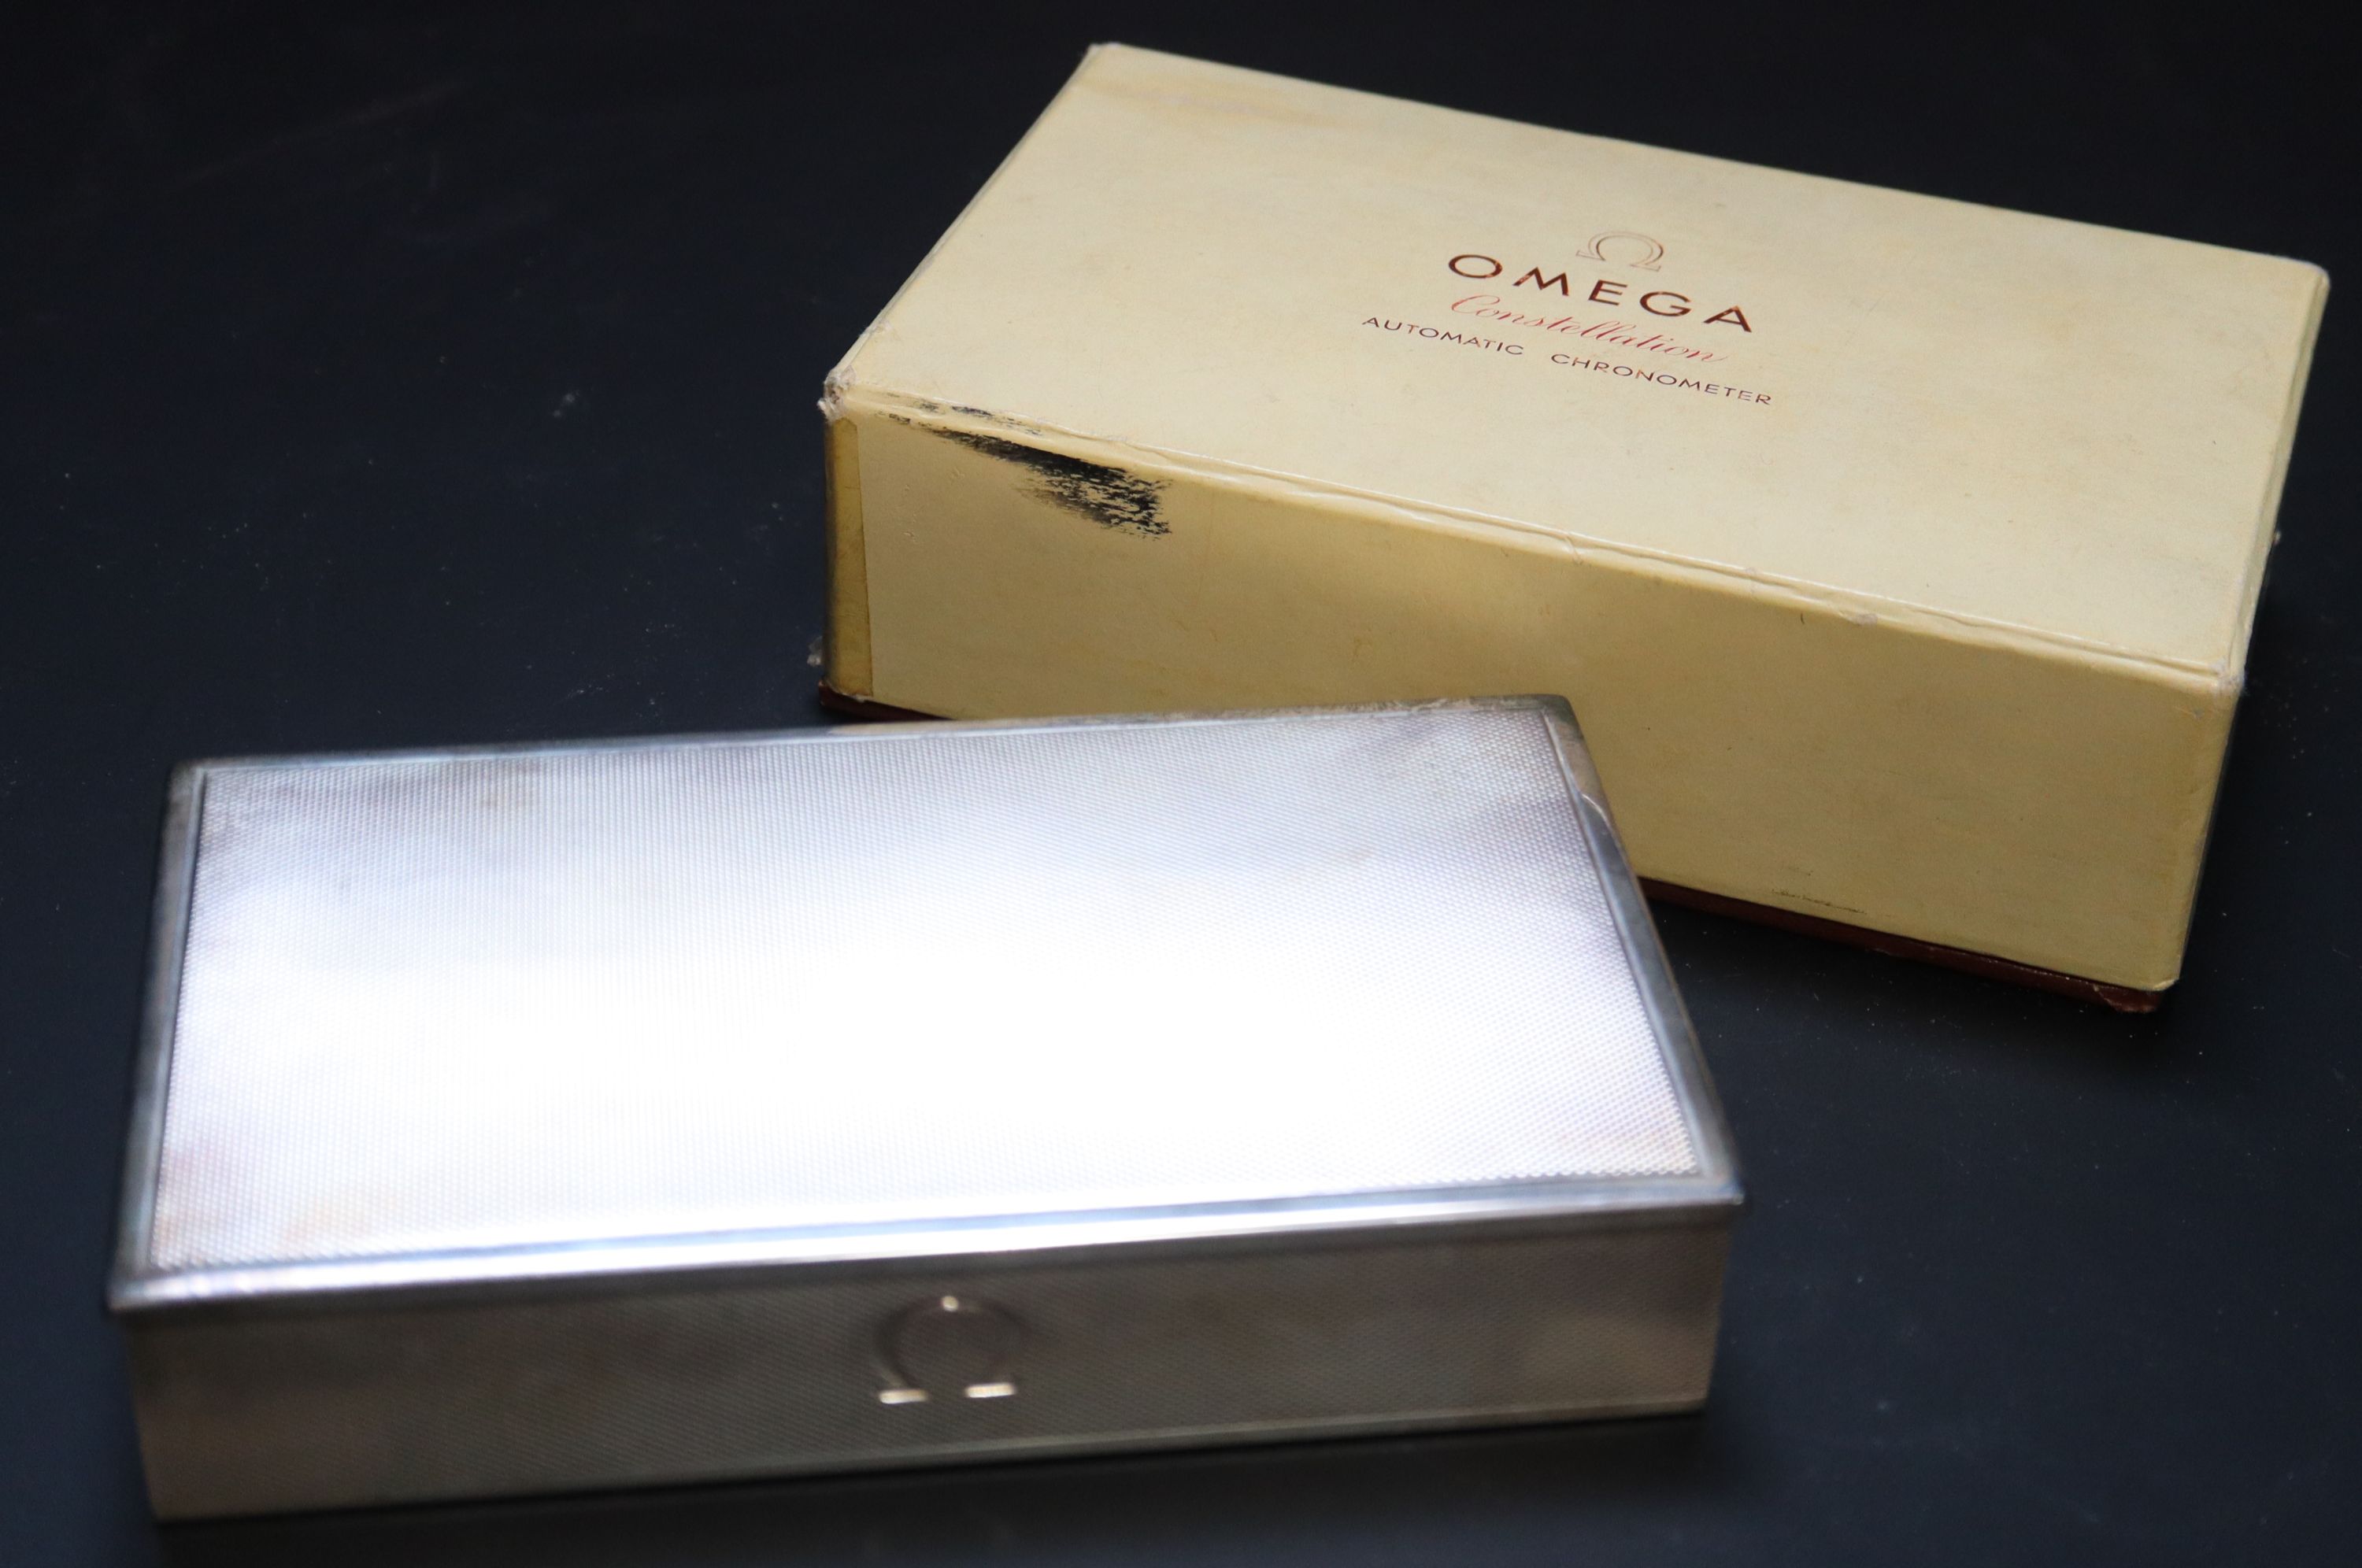 An engine turned sterling 925 mounted rectangular Omega Constellation wrist watch box (no watch),